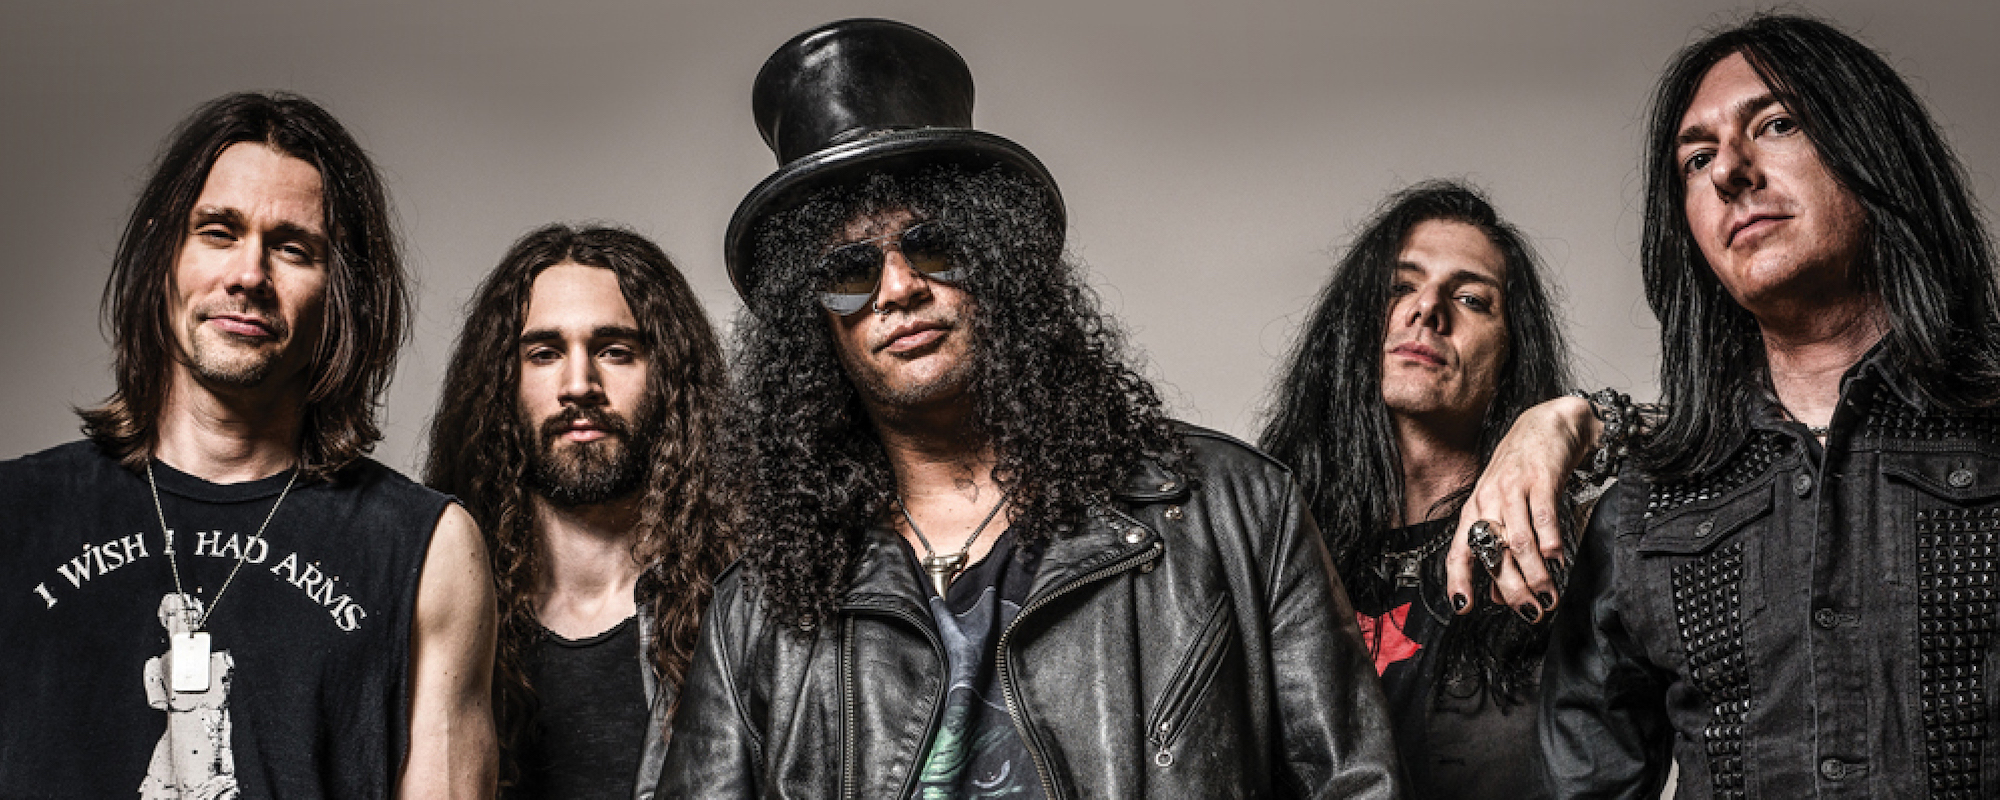 Slash Teases “The River is Rising” with Myles Kennedy and The Conspirators